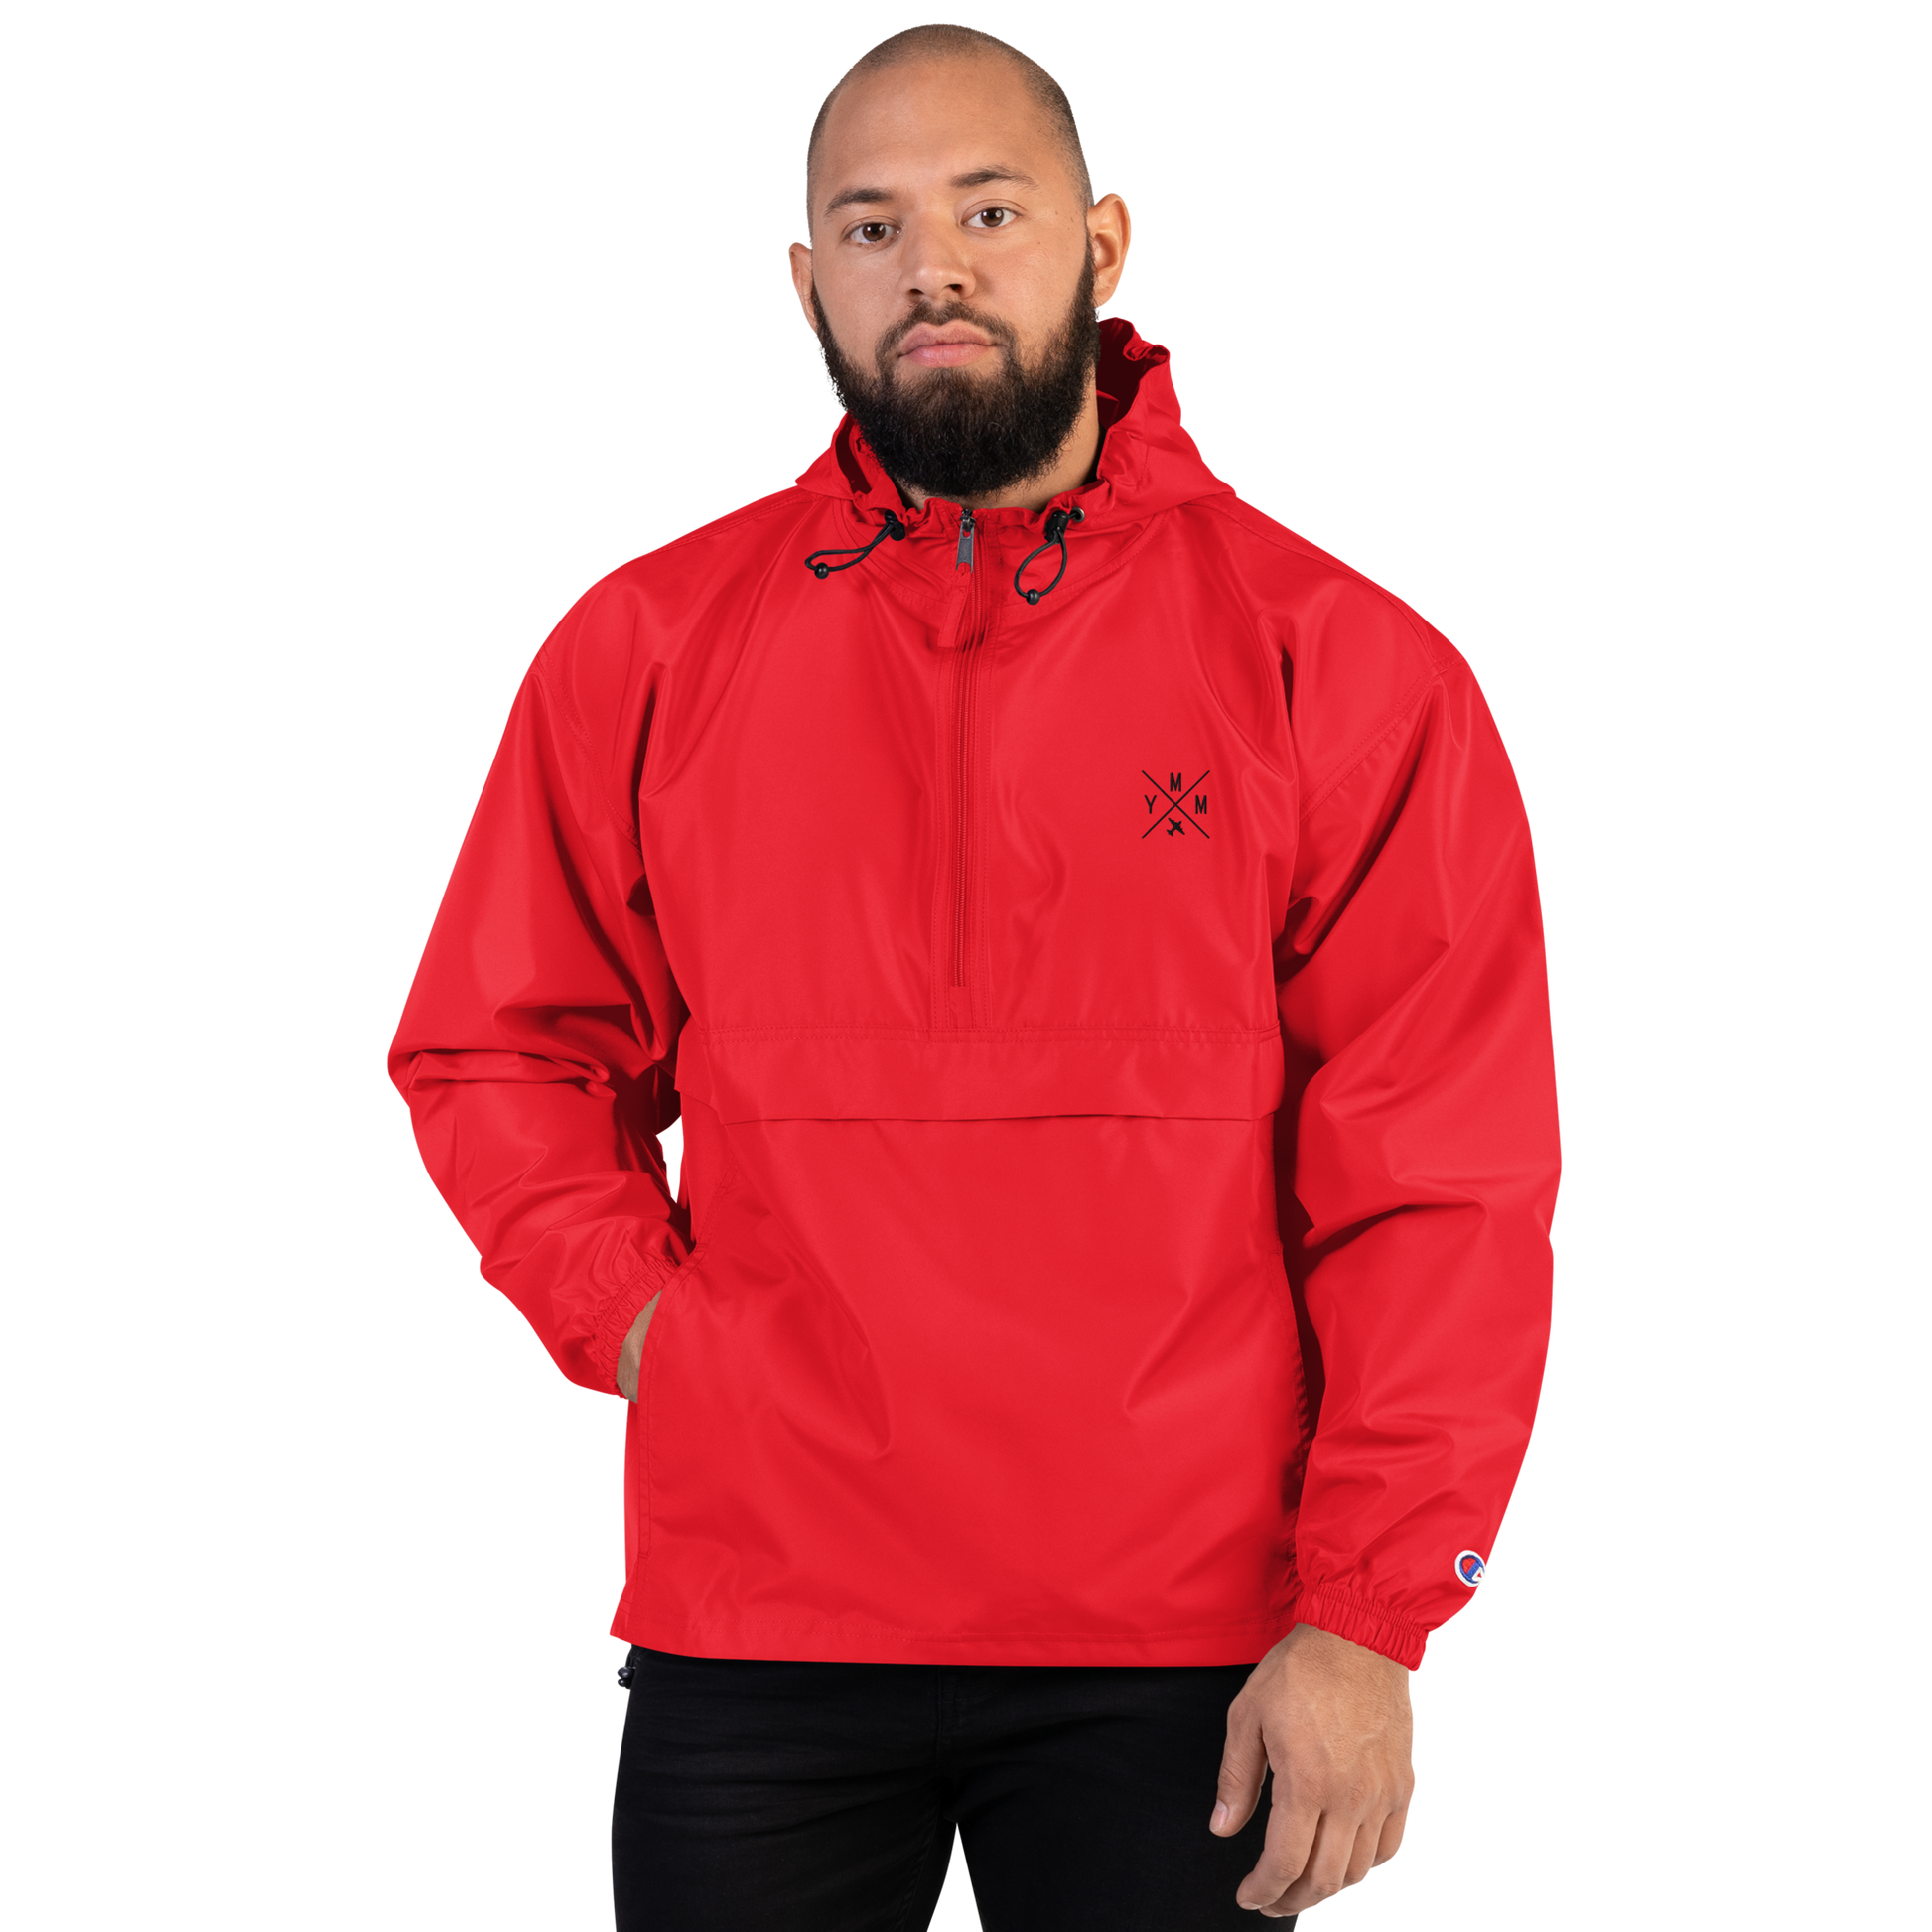 Crossed-X Packable Jacket • YMM Fort McMurray • YHM Designs - Image 11